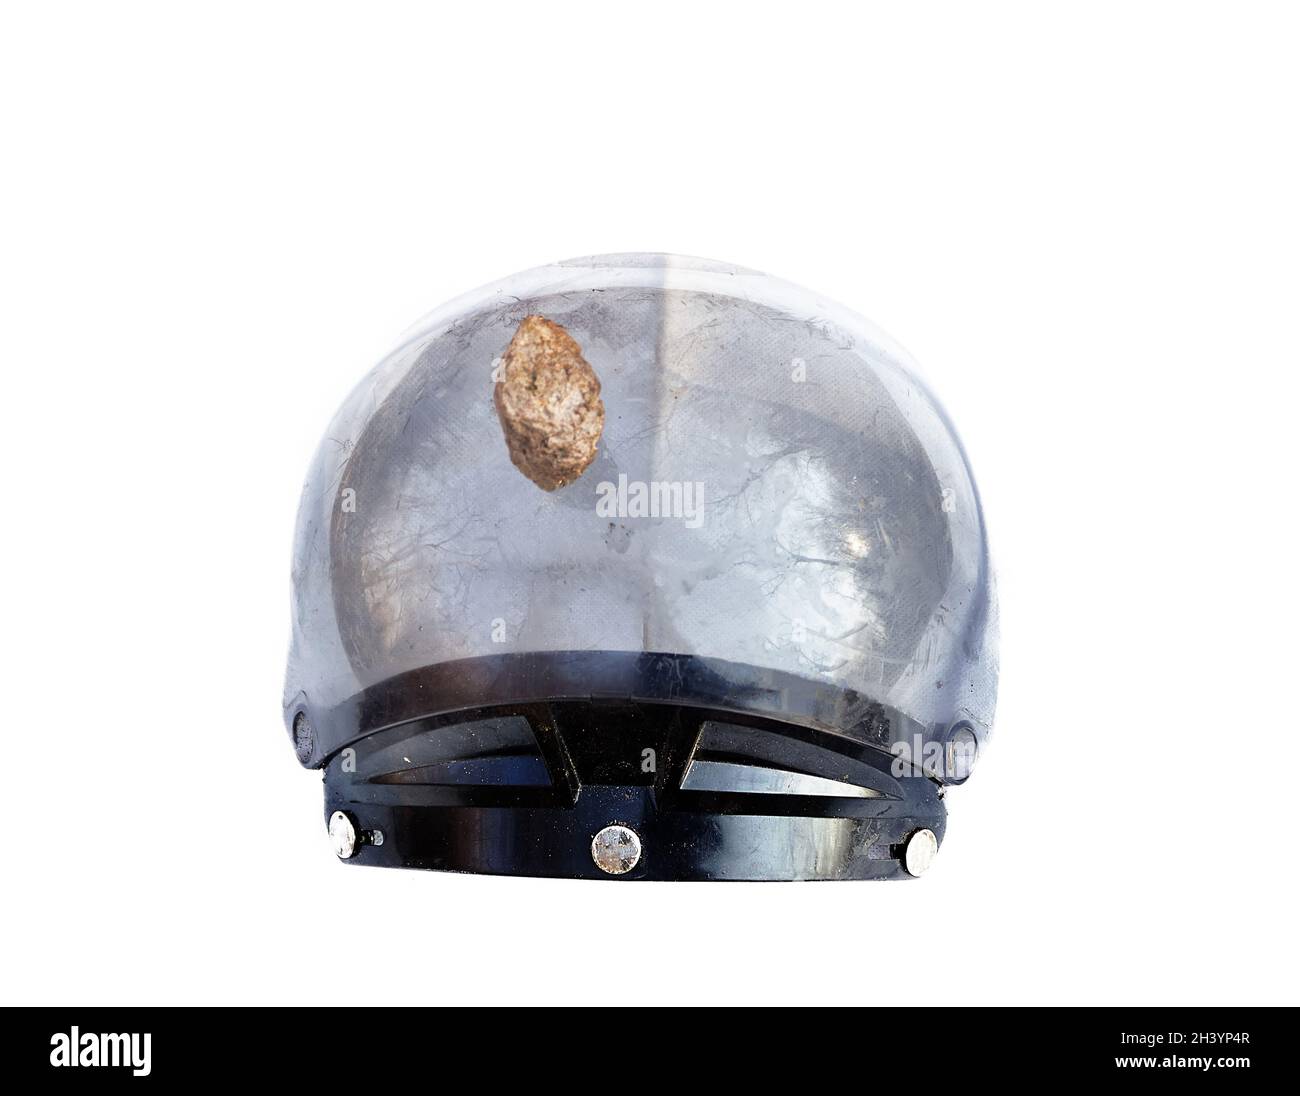 Helmet pierced by a stone on white background. Stock Photo